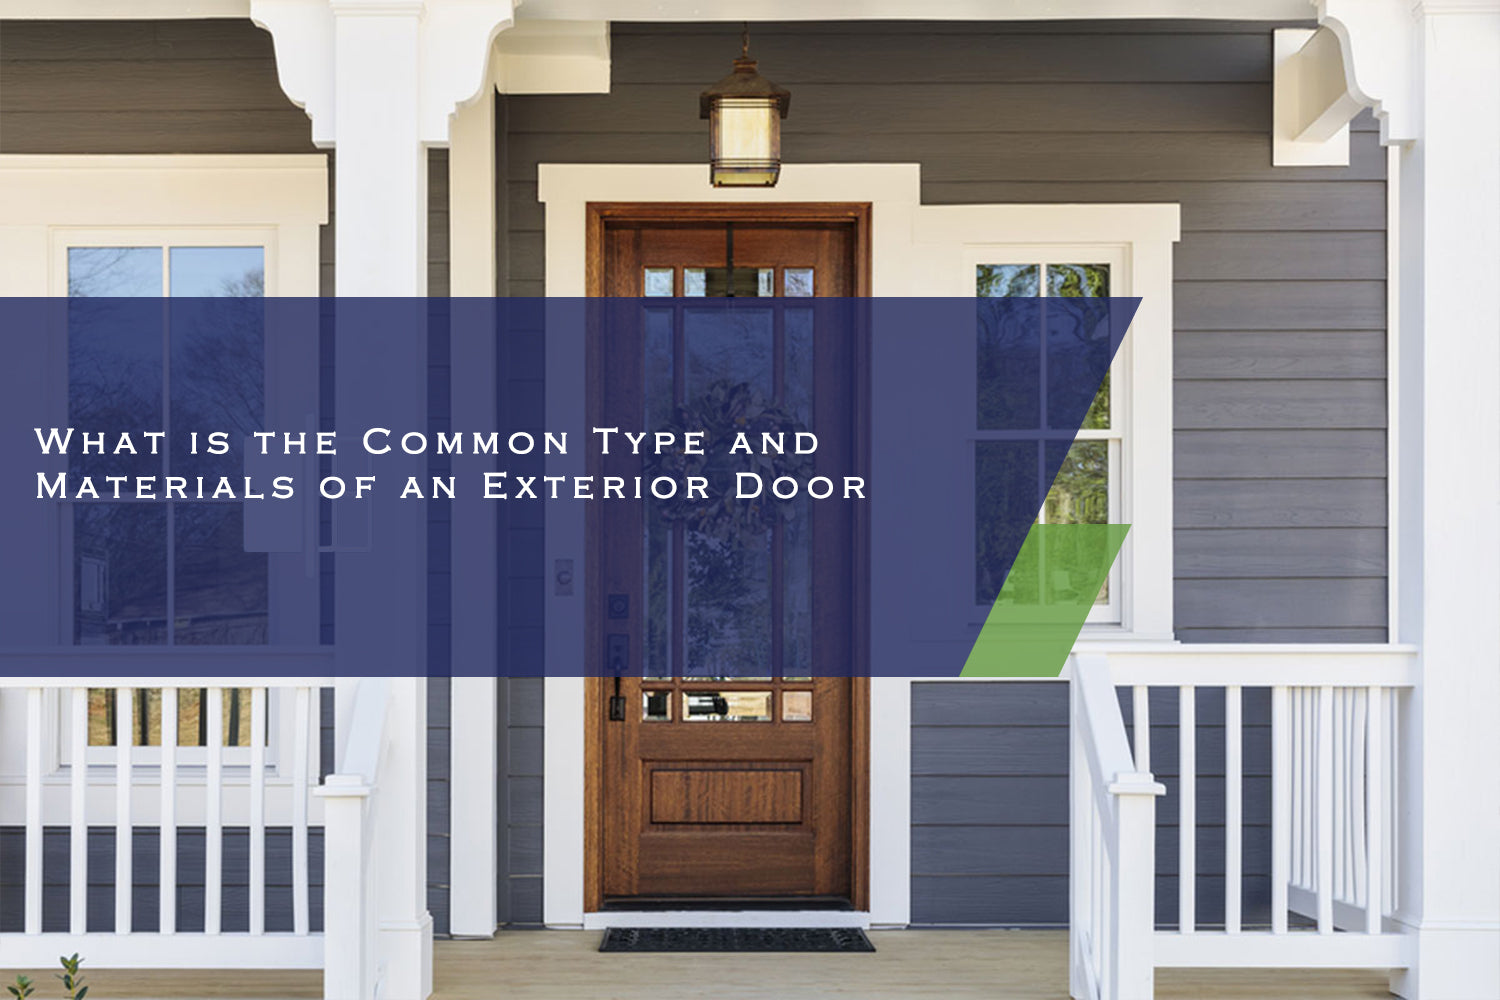 What is the Common Type and Materials of an Exterior Door